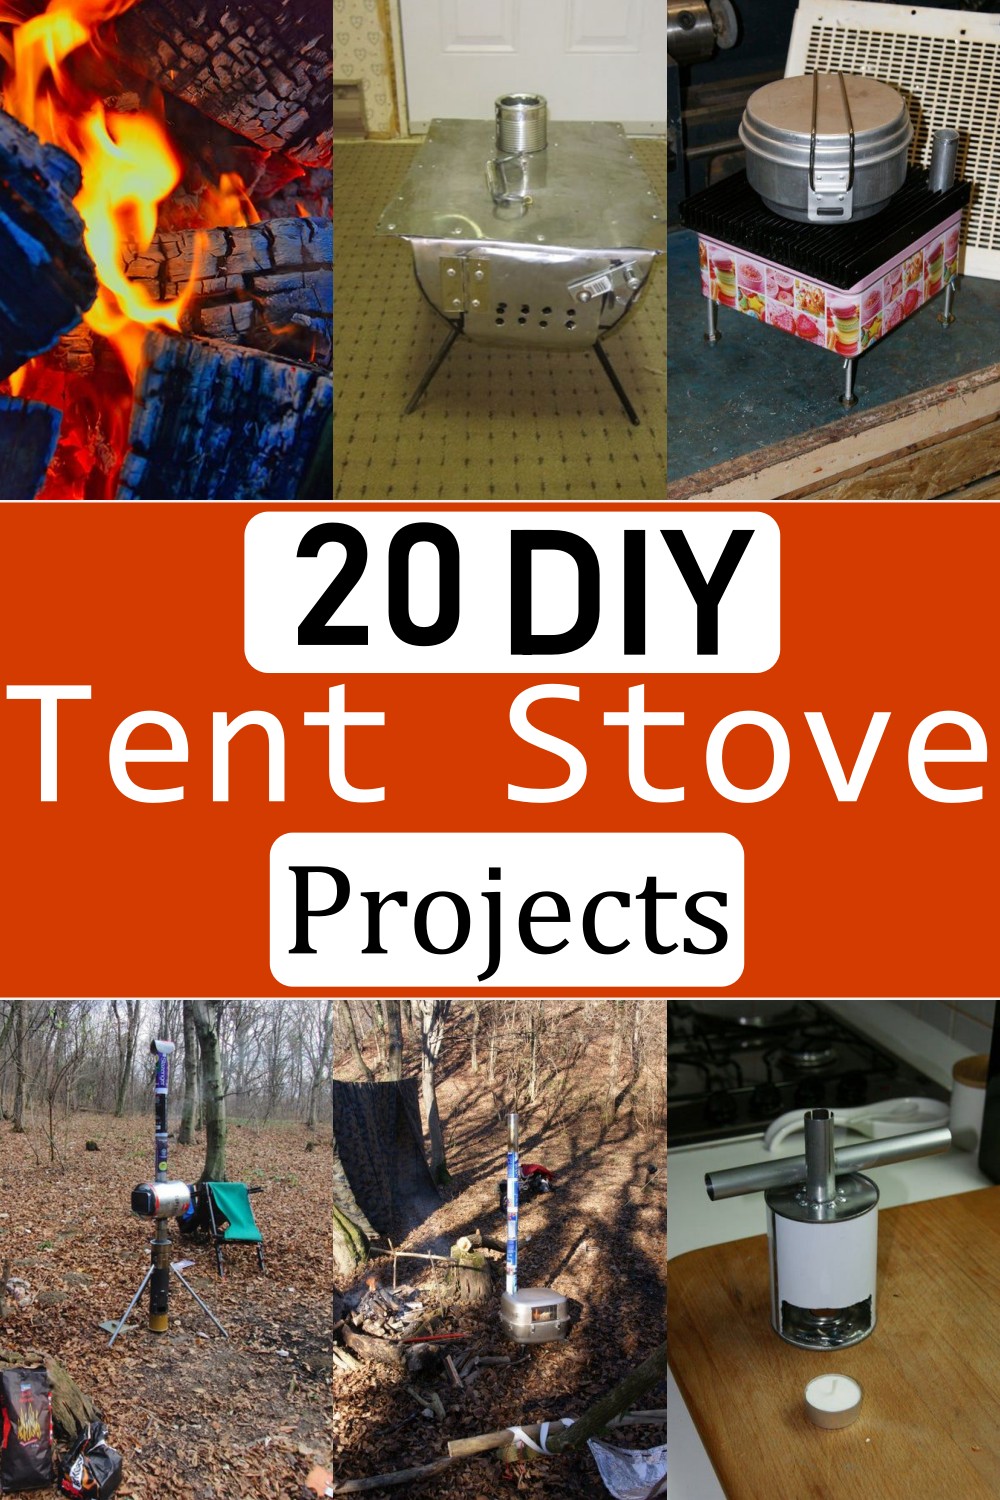 Tent Stove Projects